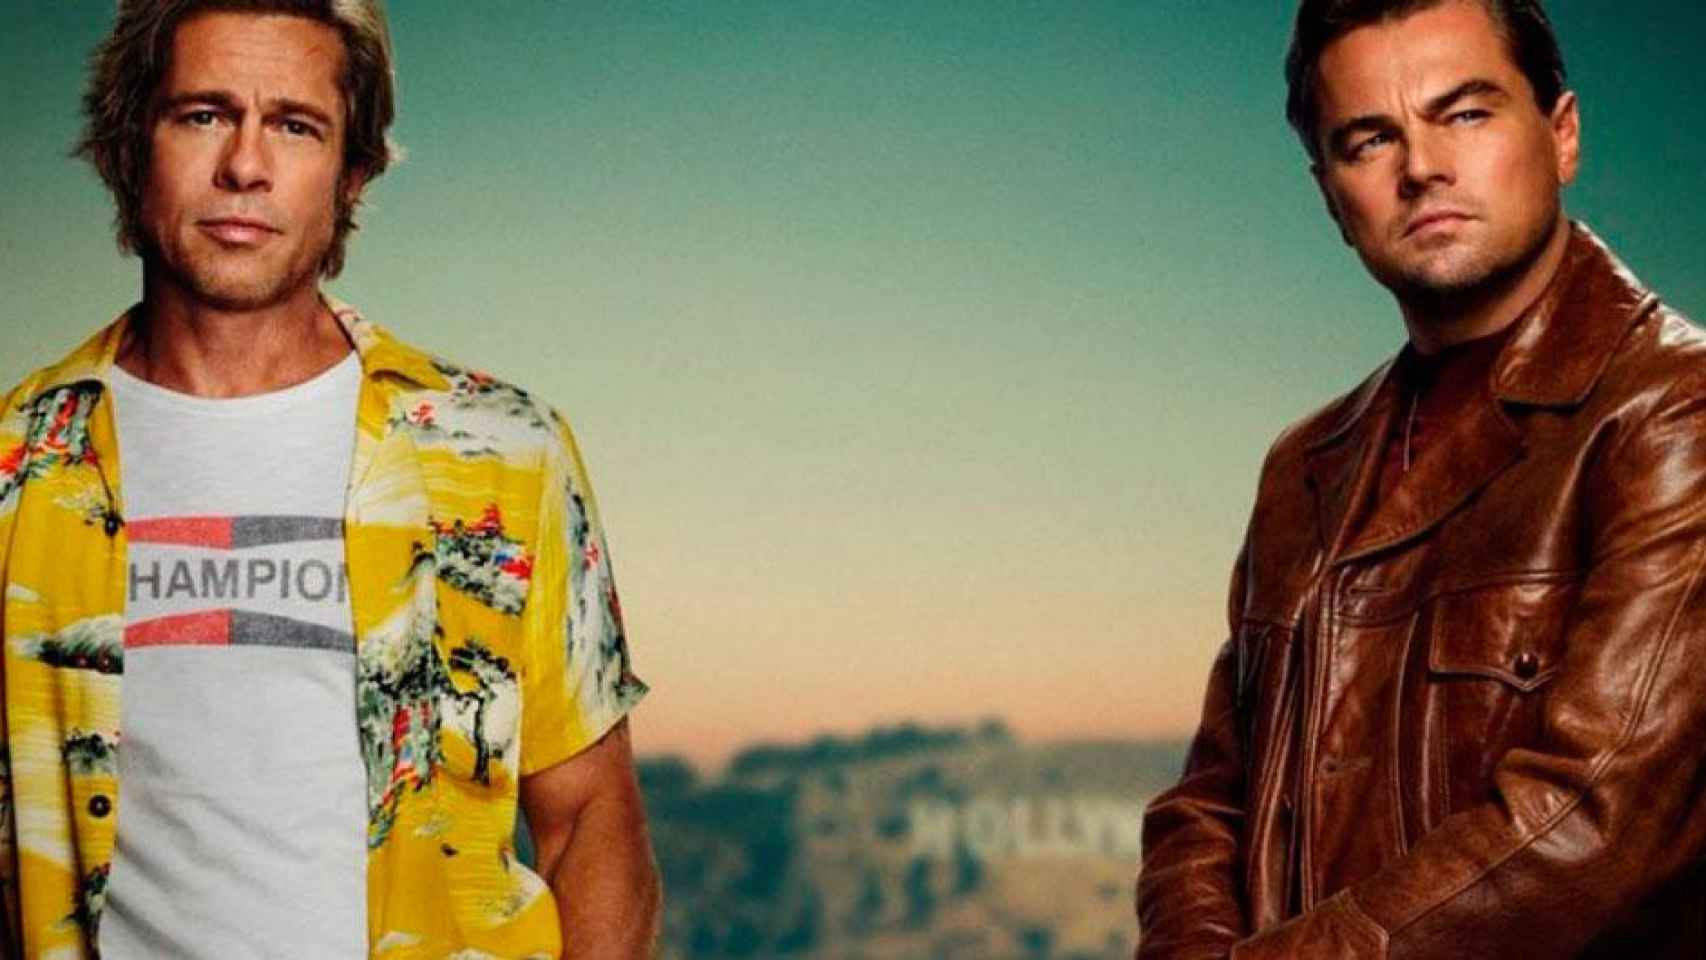 Póster de 'Once Upon a Time in Hollywood', de Quentin Tarantino / SONY PICTURES